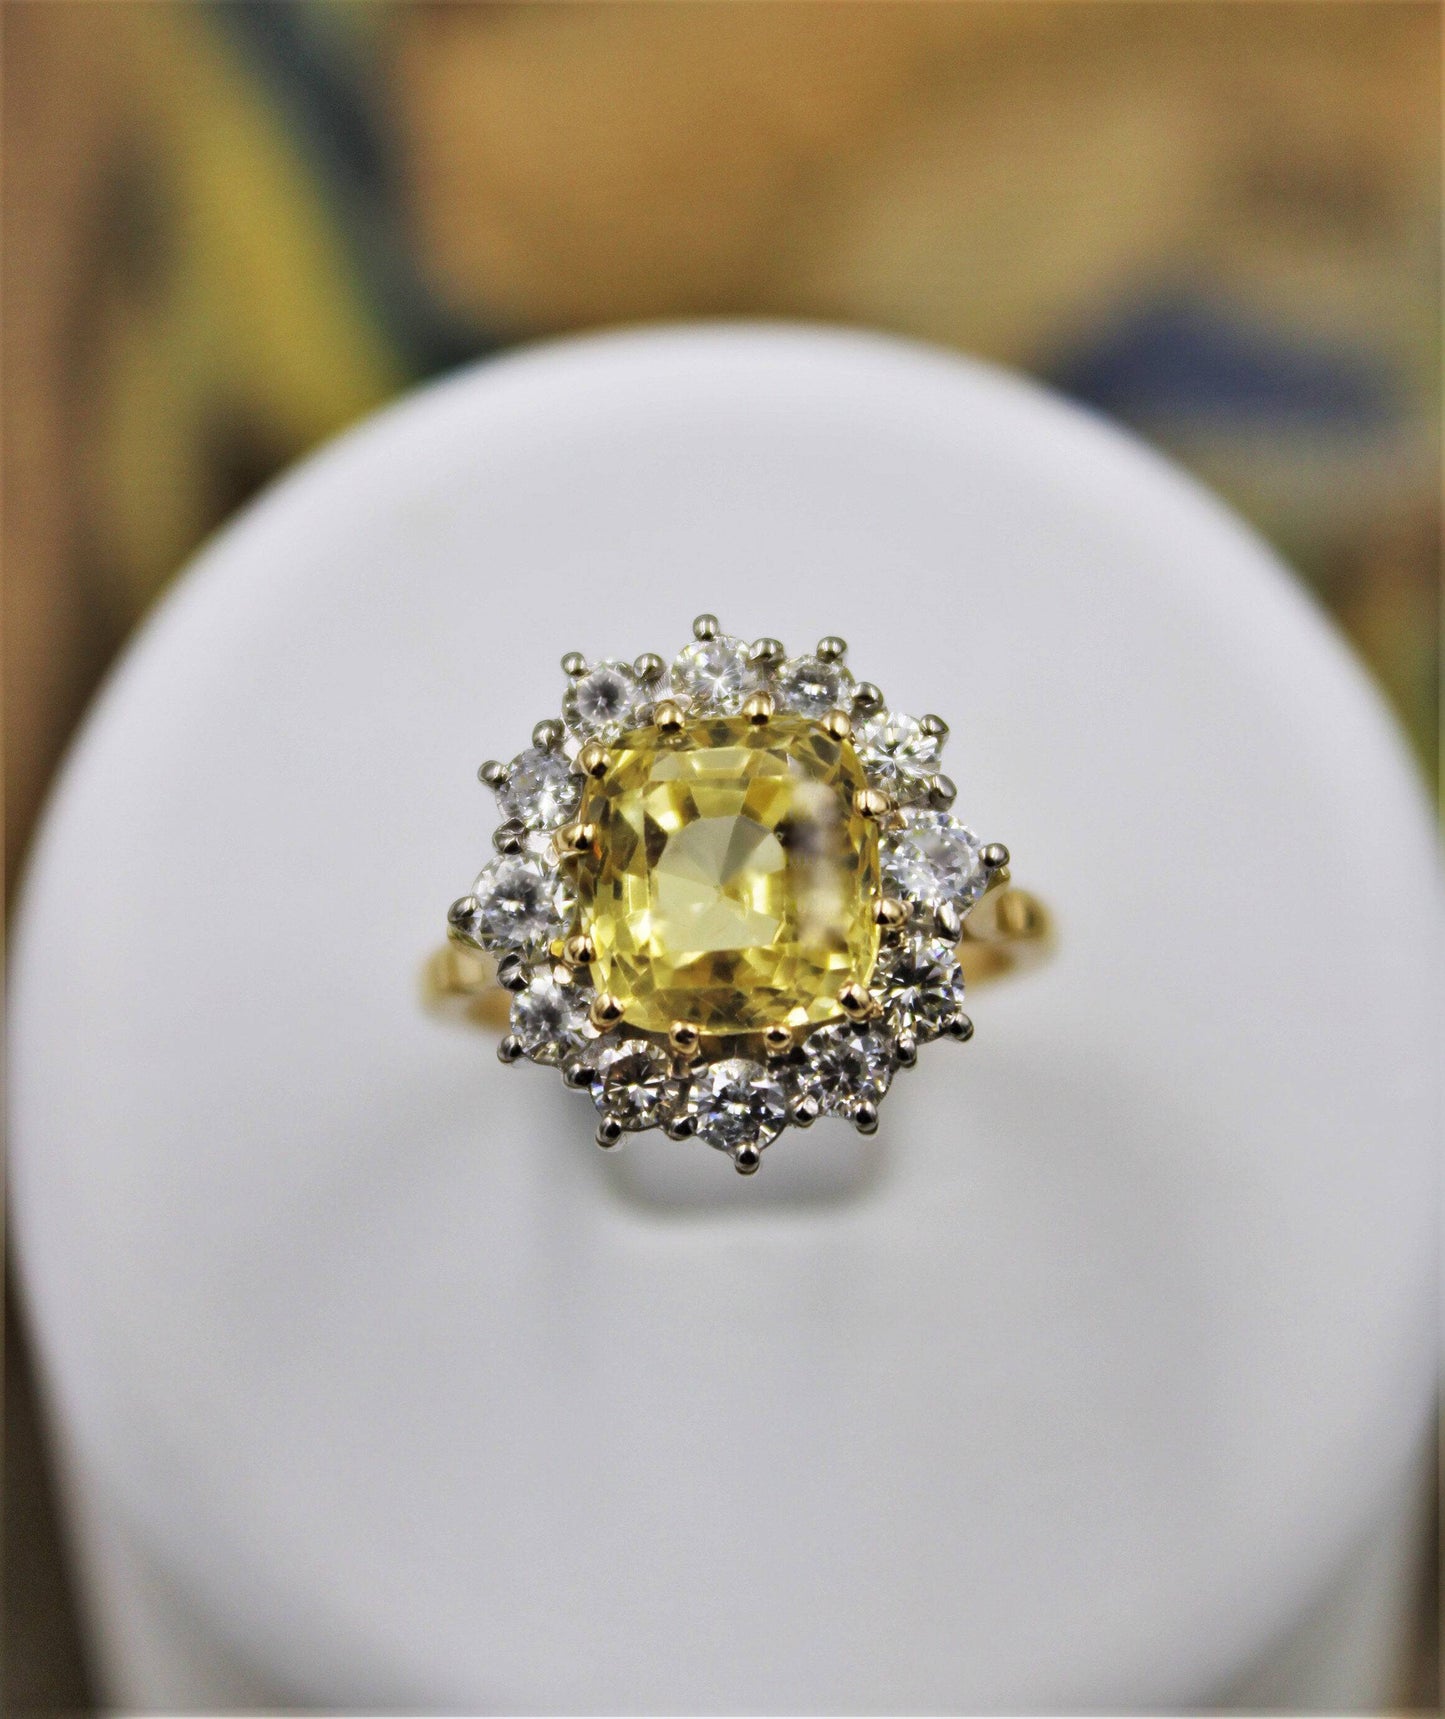 A very fine Natural Yellow Sapphire & Diamond Ring set in 18ct White & Yellow Gold, Circa 1985 - Robin Haydock Antiques